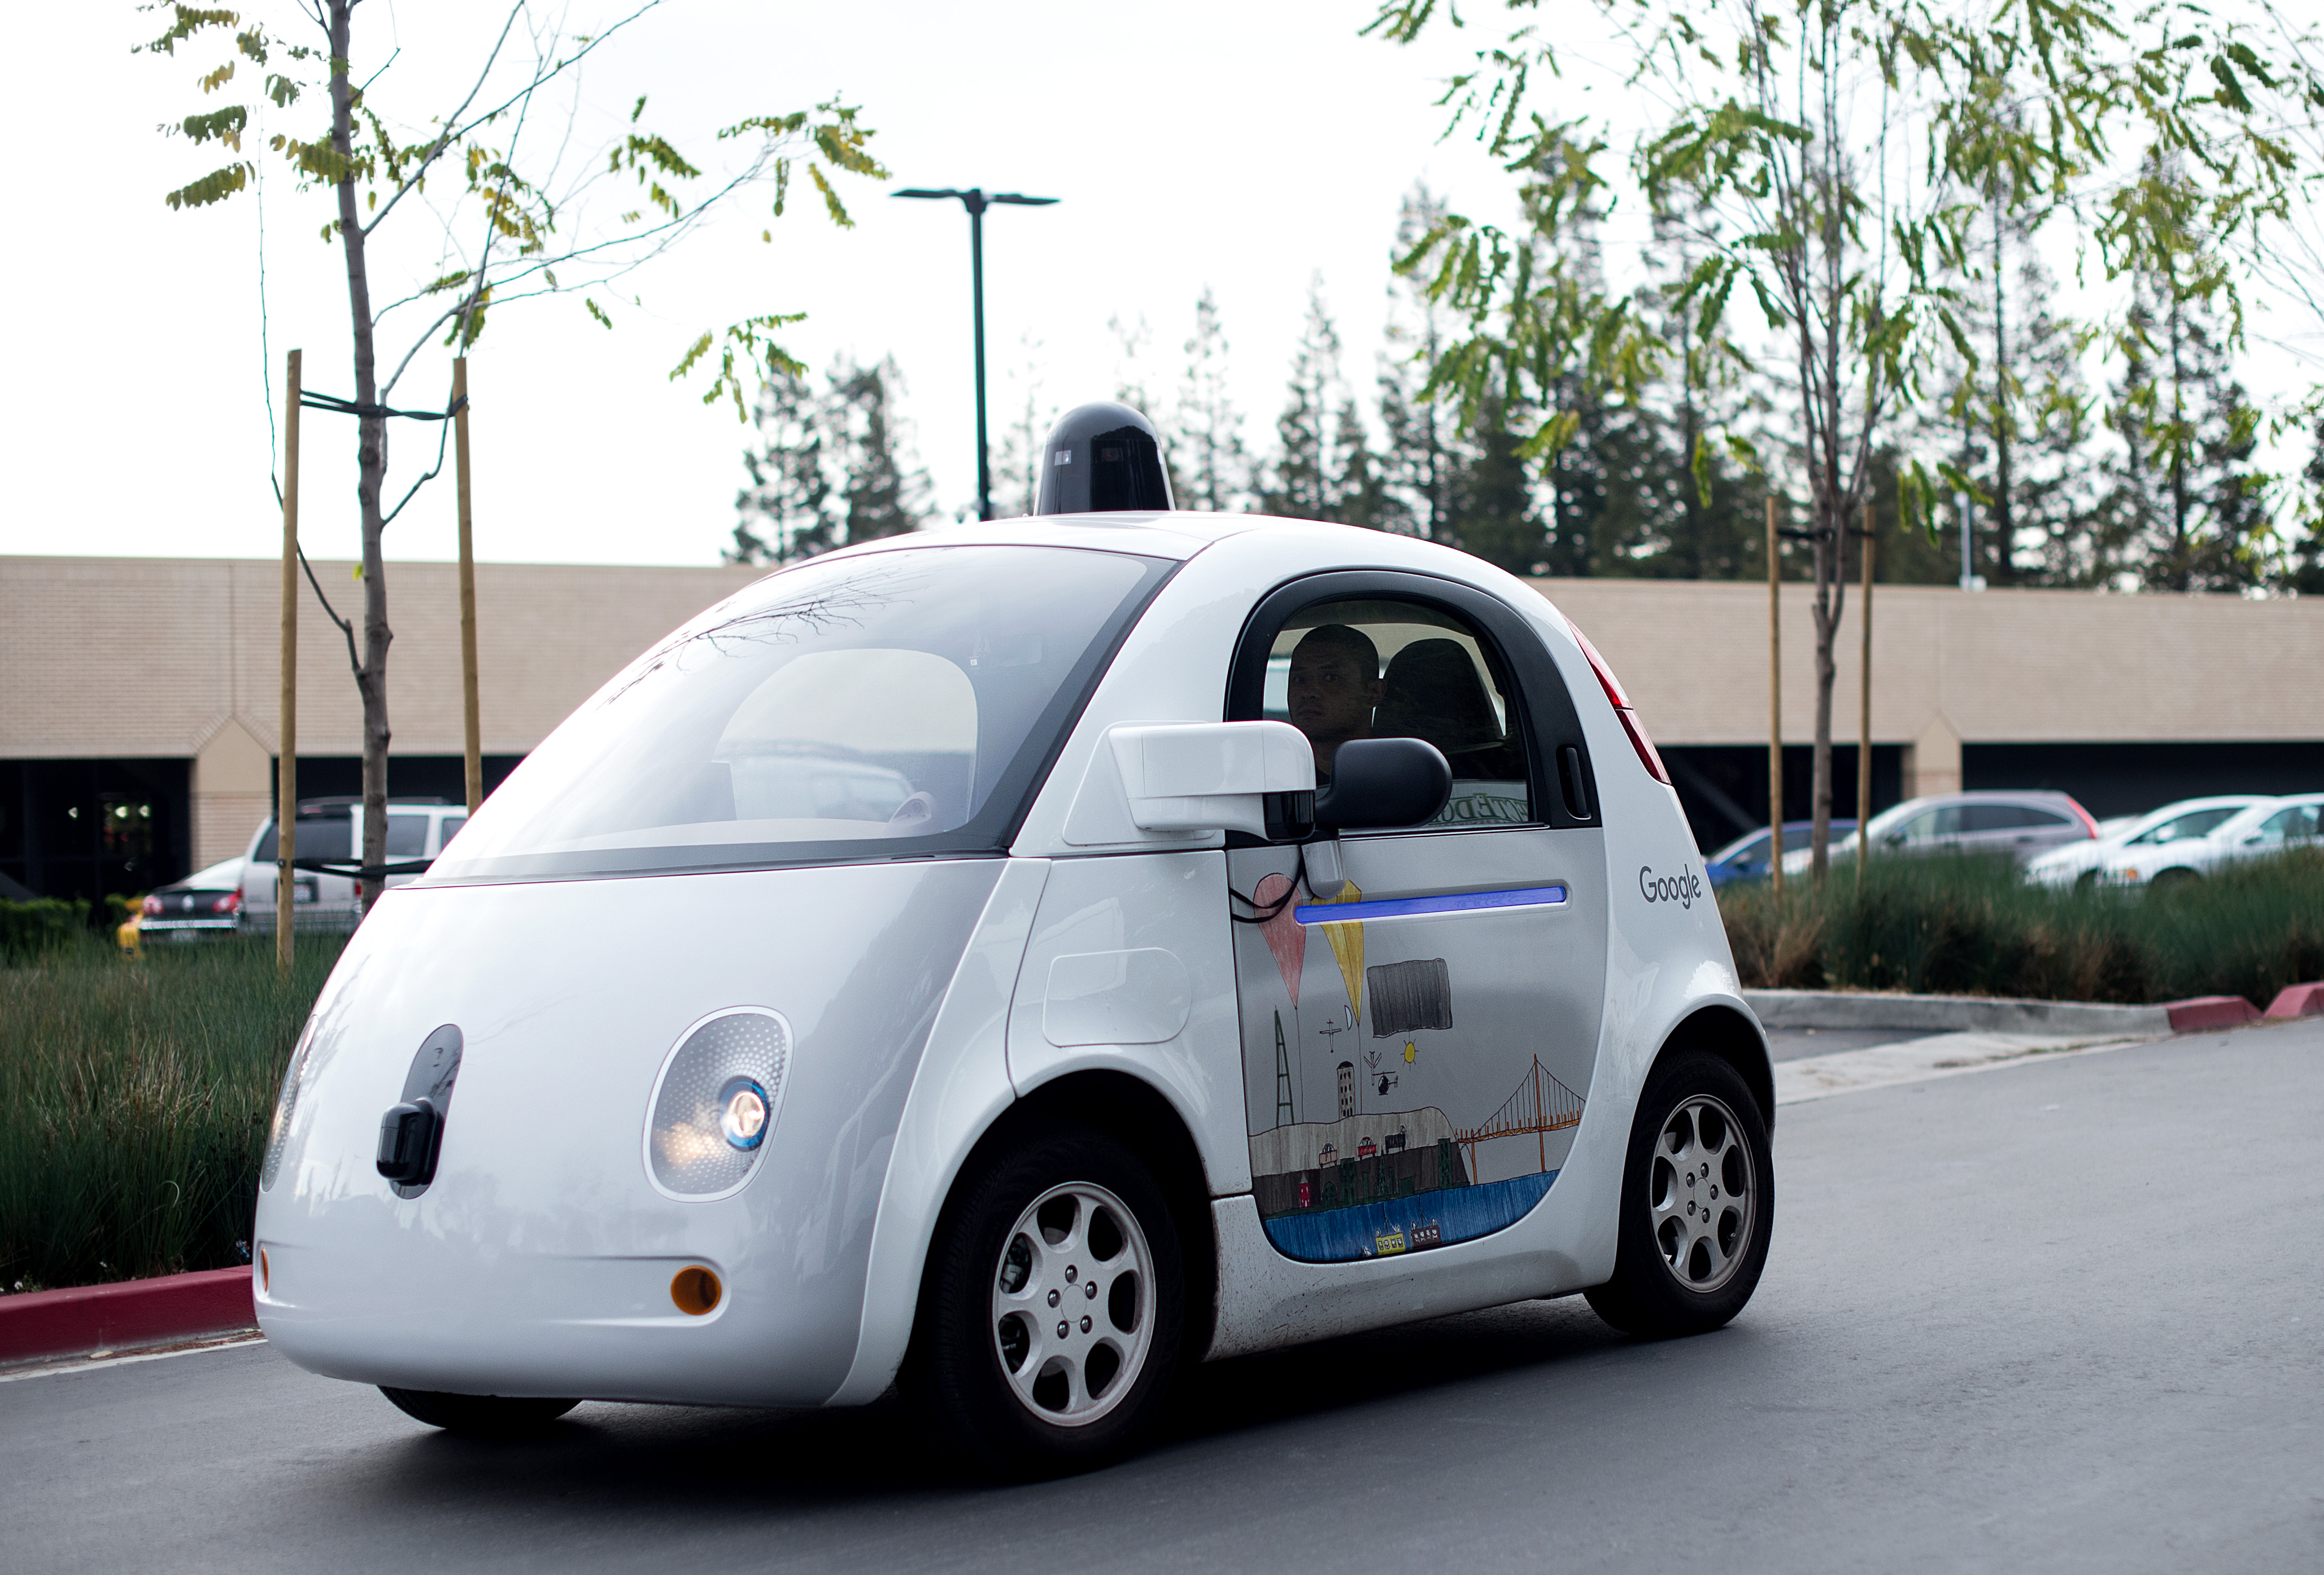 A self-driving car traverses a parking lot at Google's headquarters in Mountain View, California on January 8, 2016. (Noah Berger—AFP/Getty Images)